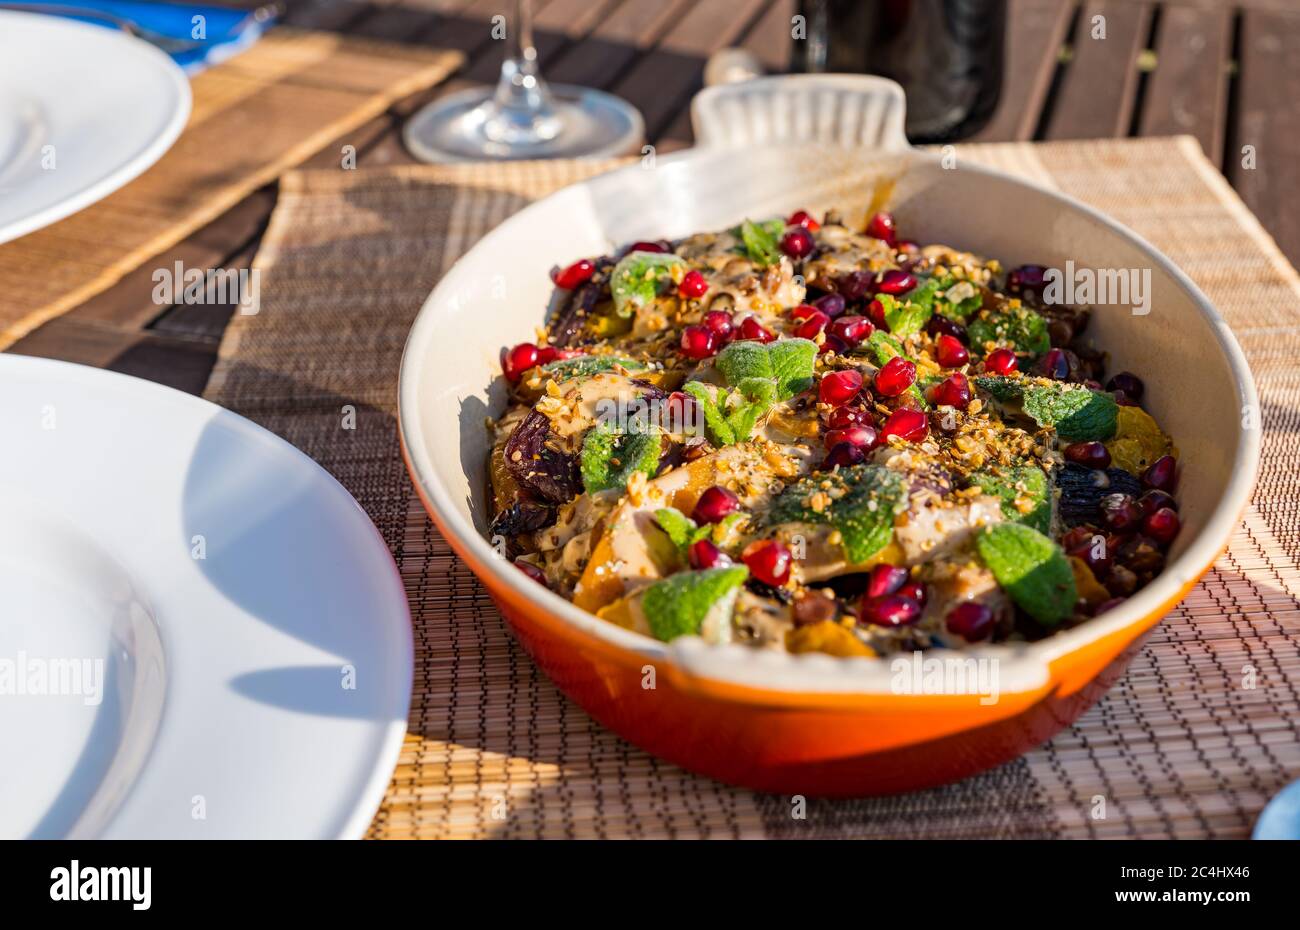 Middle Eastern roasted vegetable dish with lentils, butternut squash and pomegranate seeds, Summer meal outdoors, UK Stock Photo